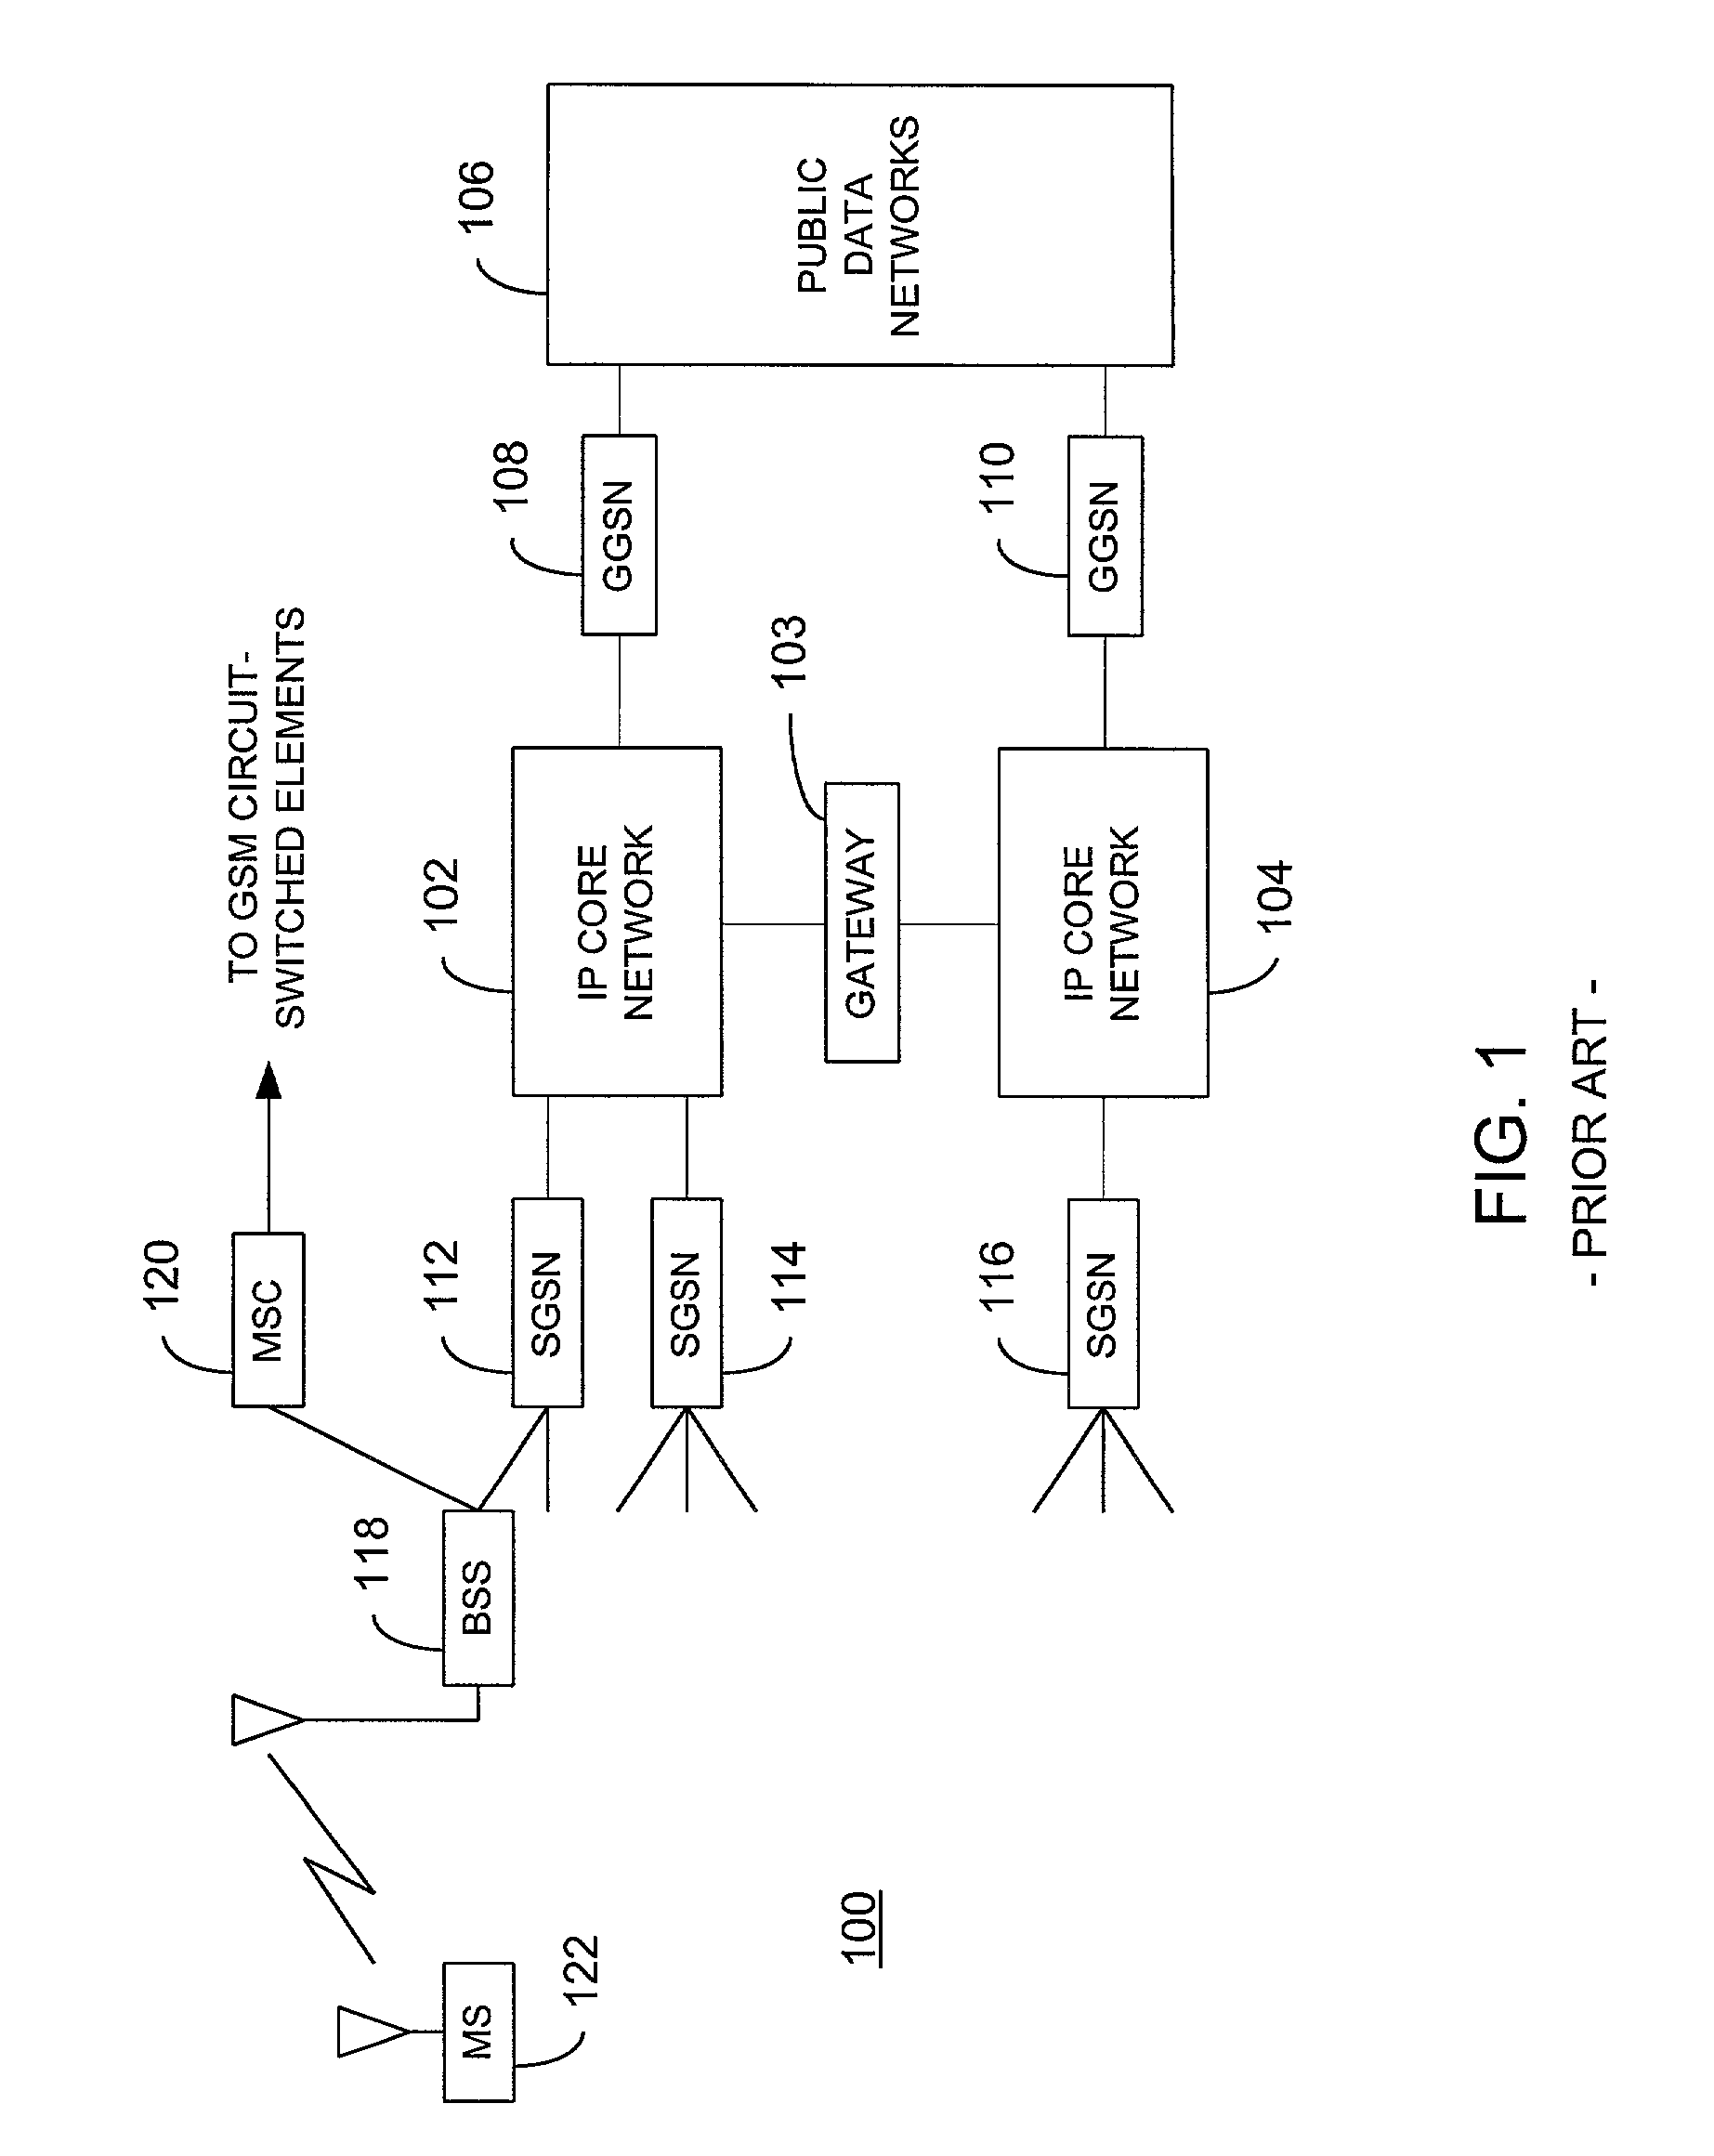 Method and apparatus for communicating data in a GPRS network based on a plurality of traffic classes